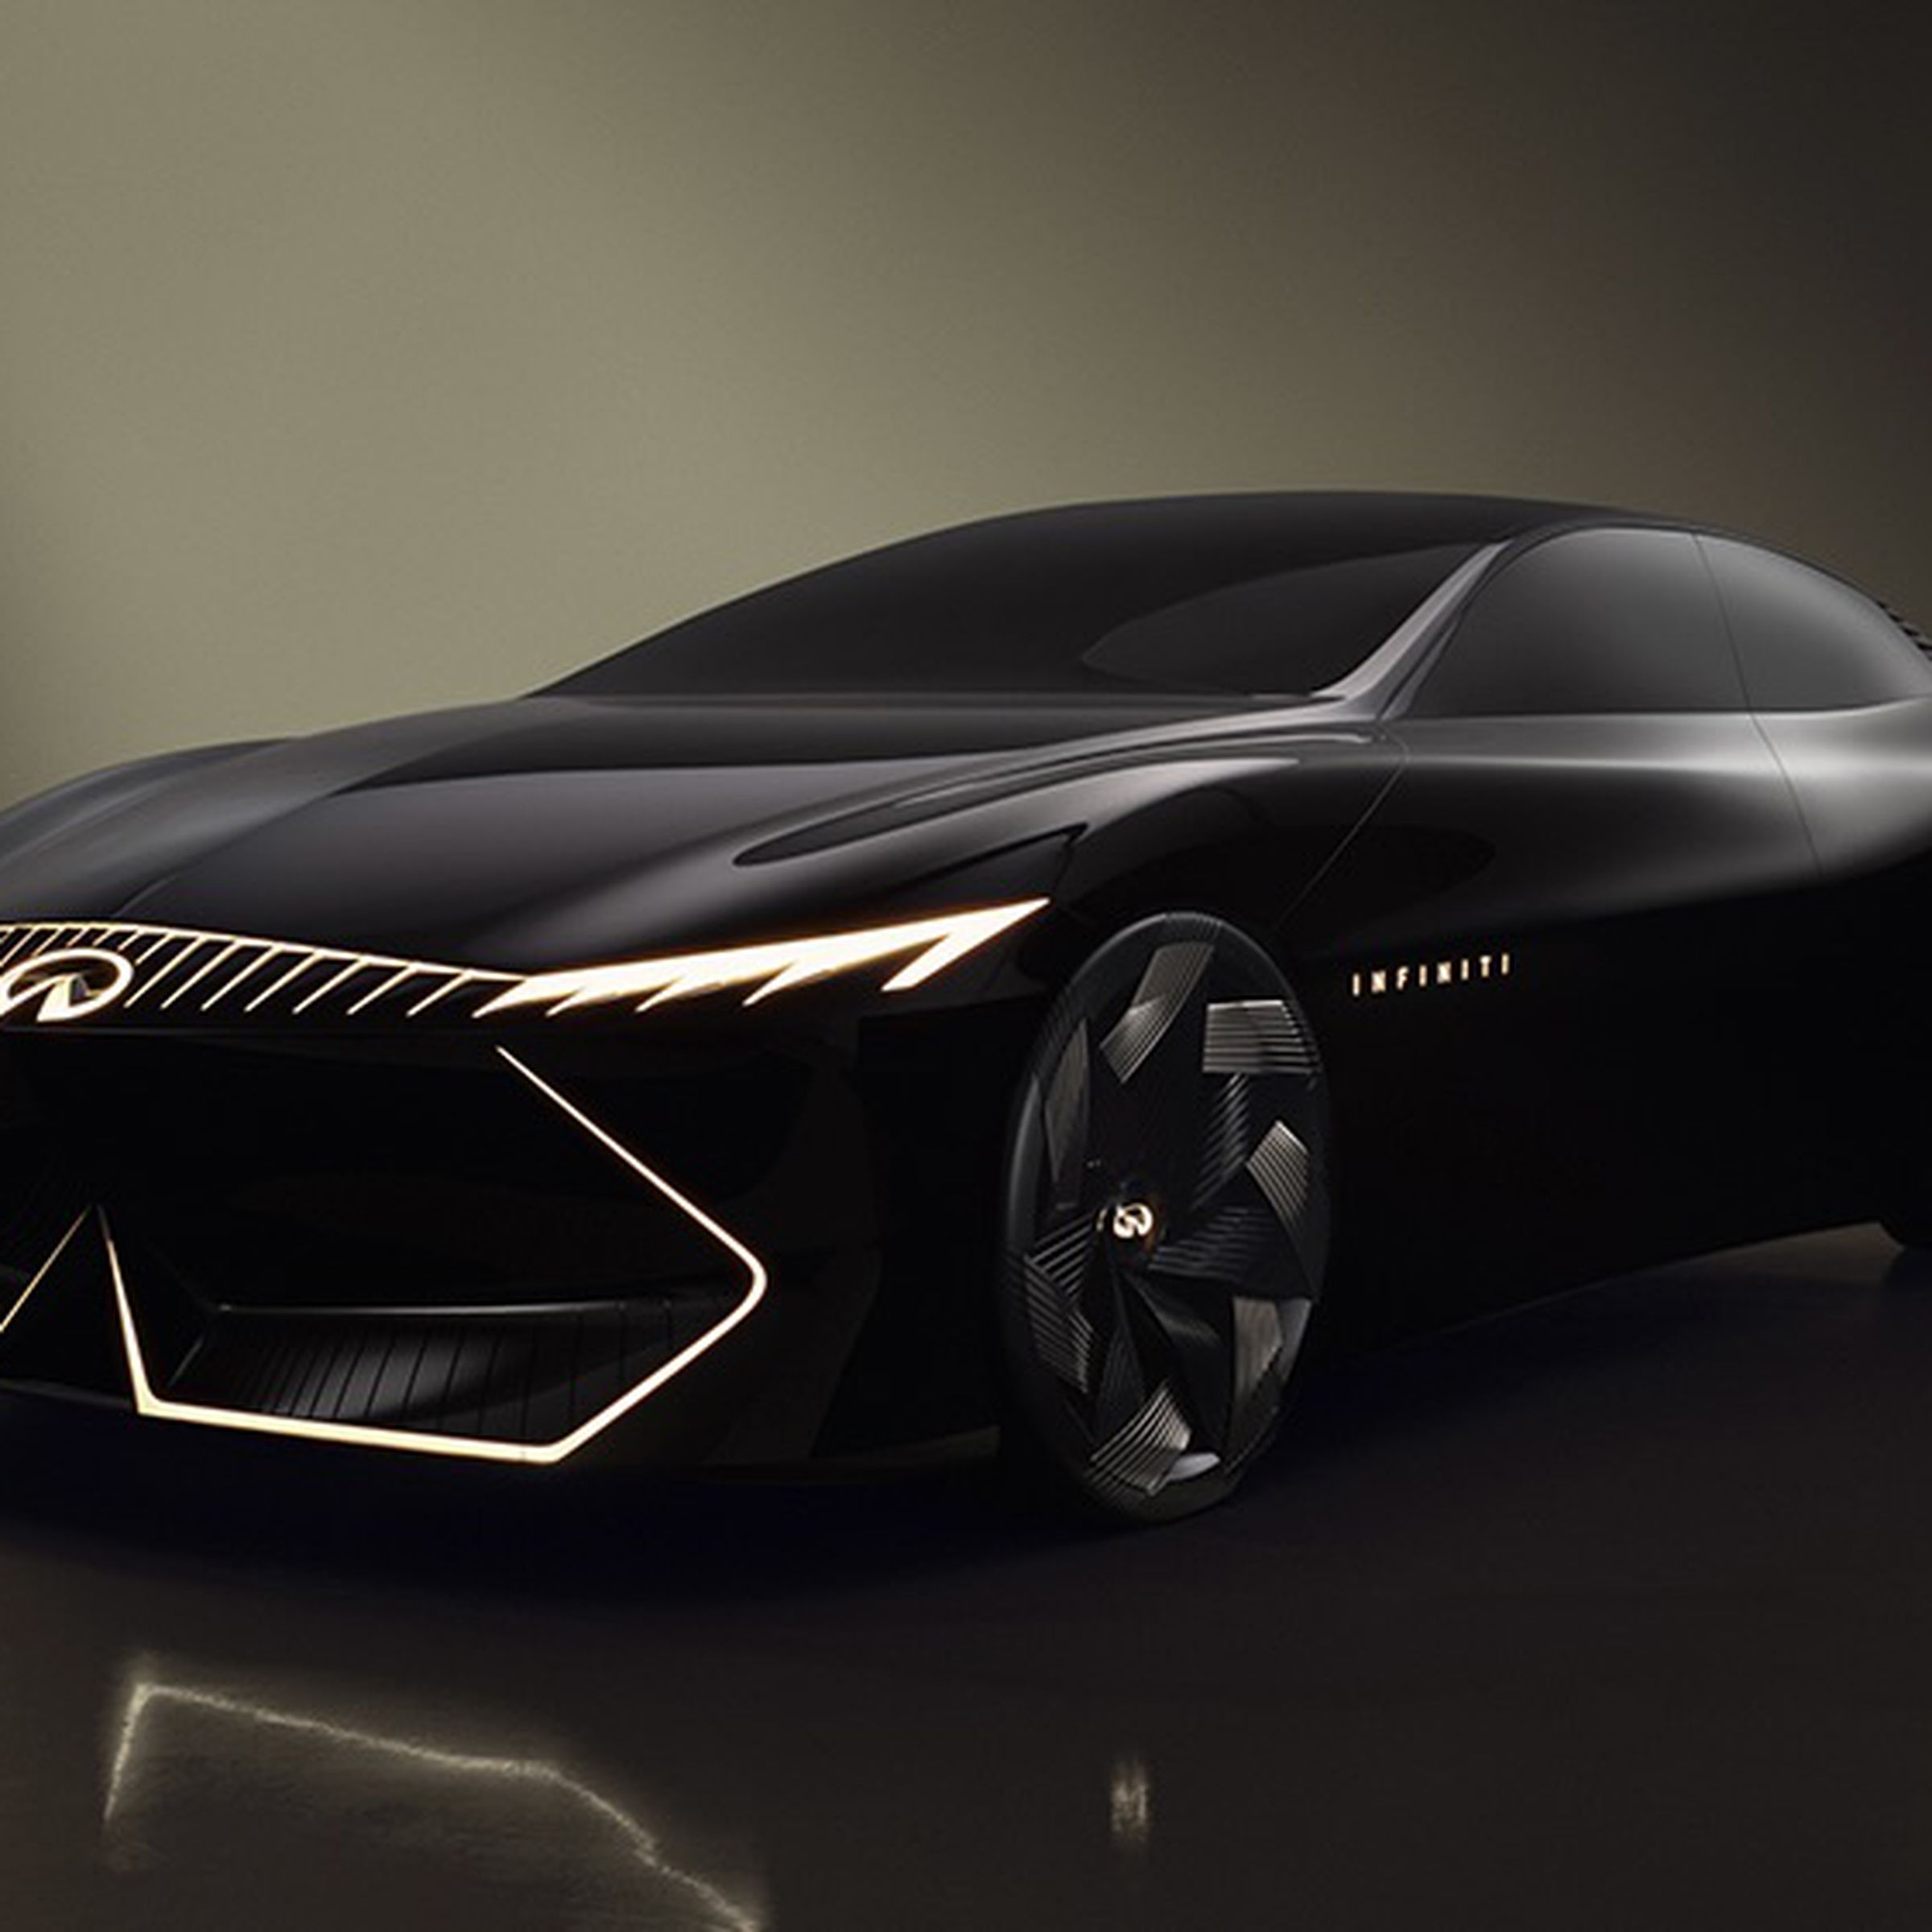 infiniti sporty sedan concept, black in color with front lined in LED